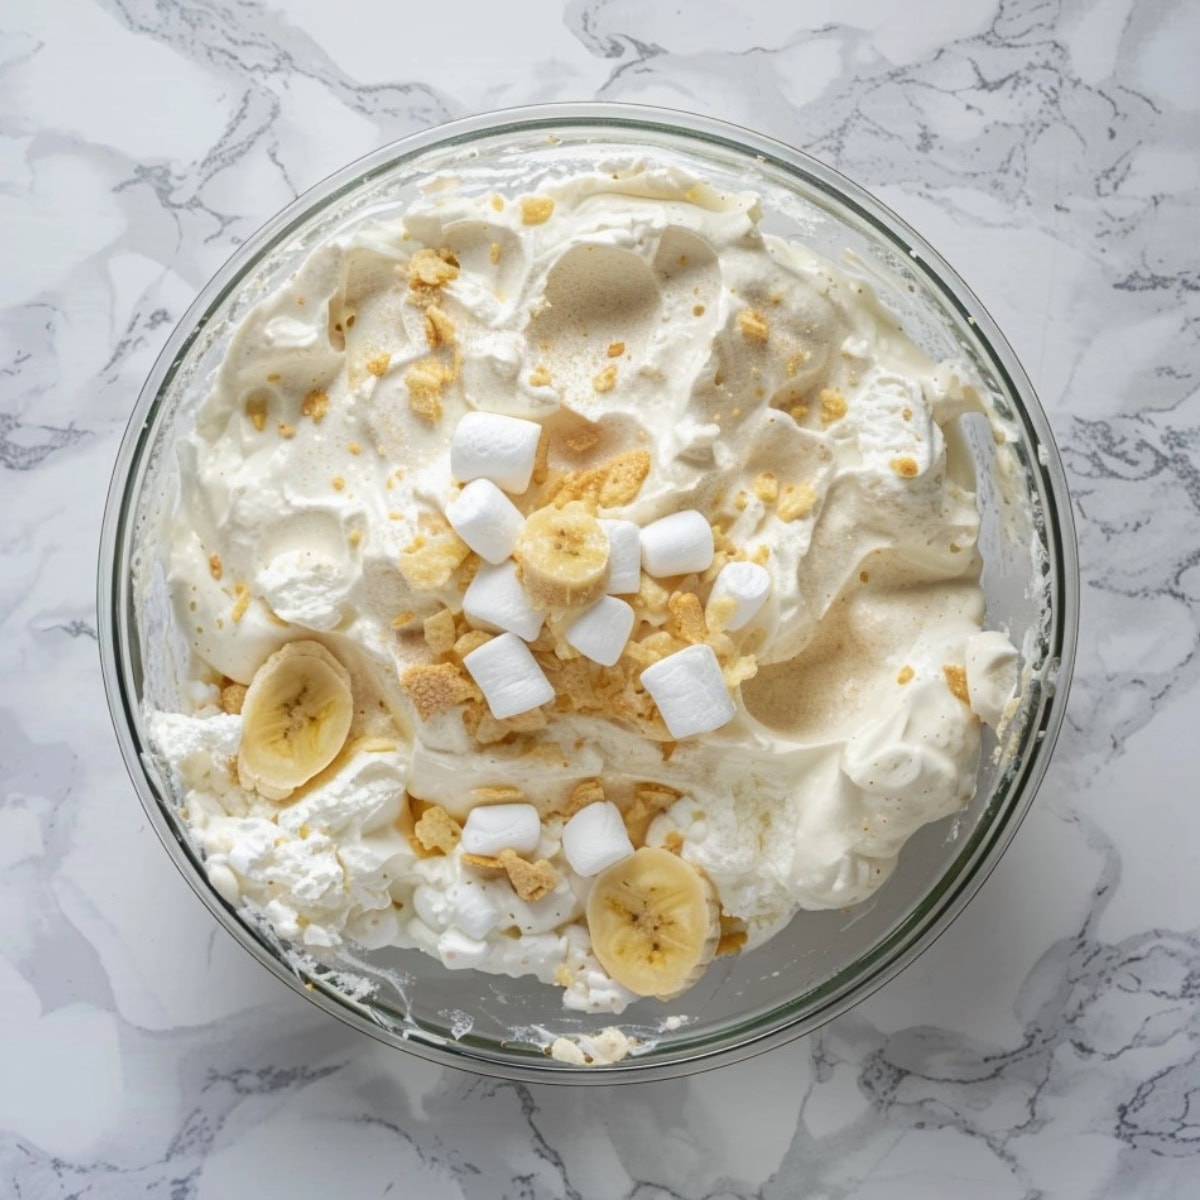 Fluffy pudding with sliced bananas and marshmallows in a glass bowl.